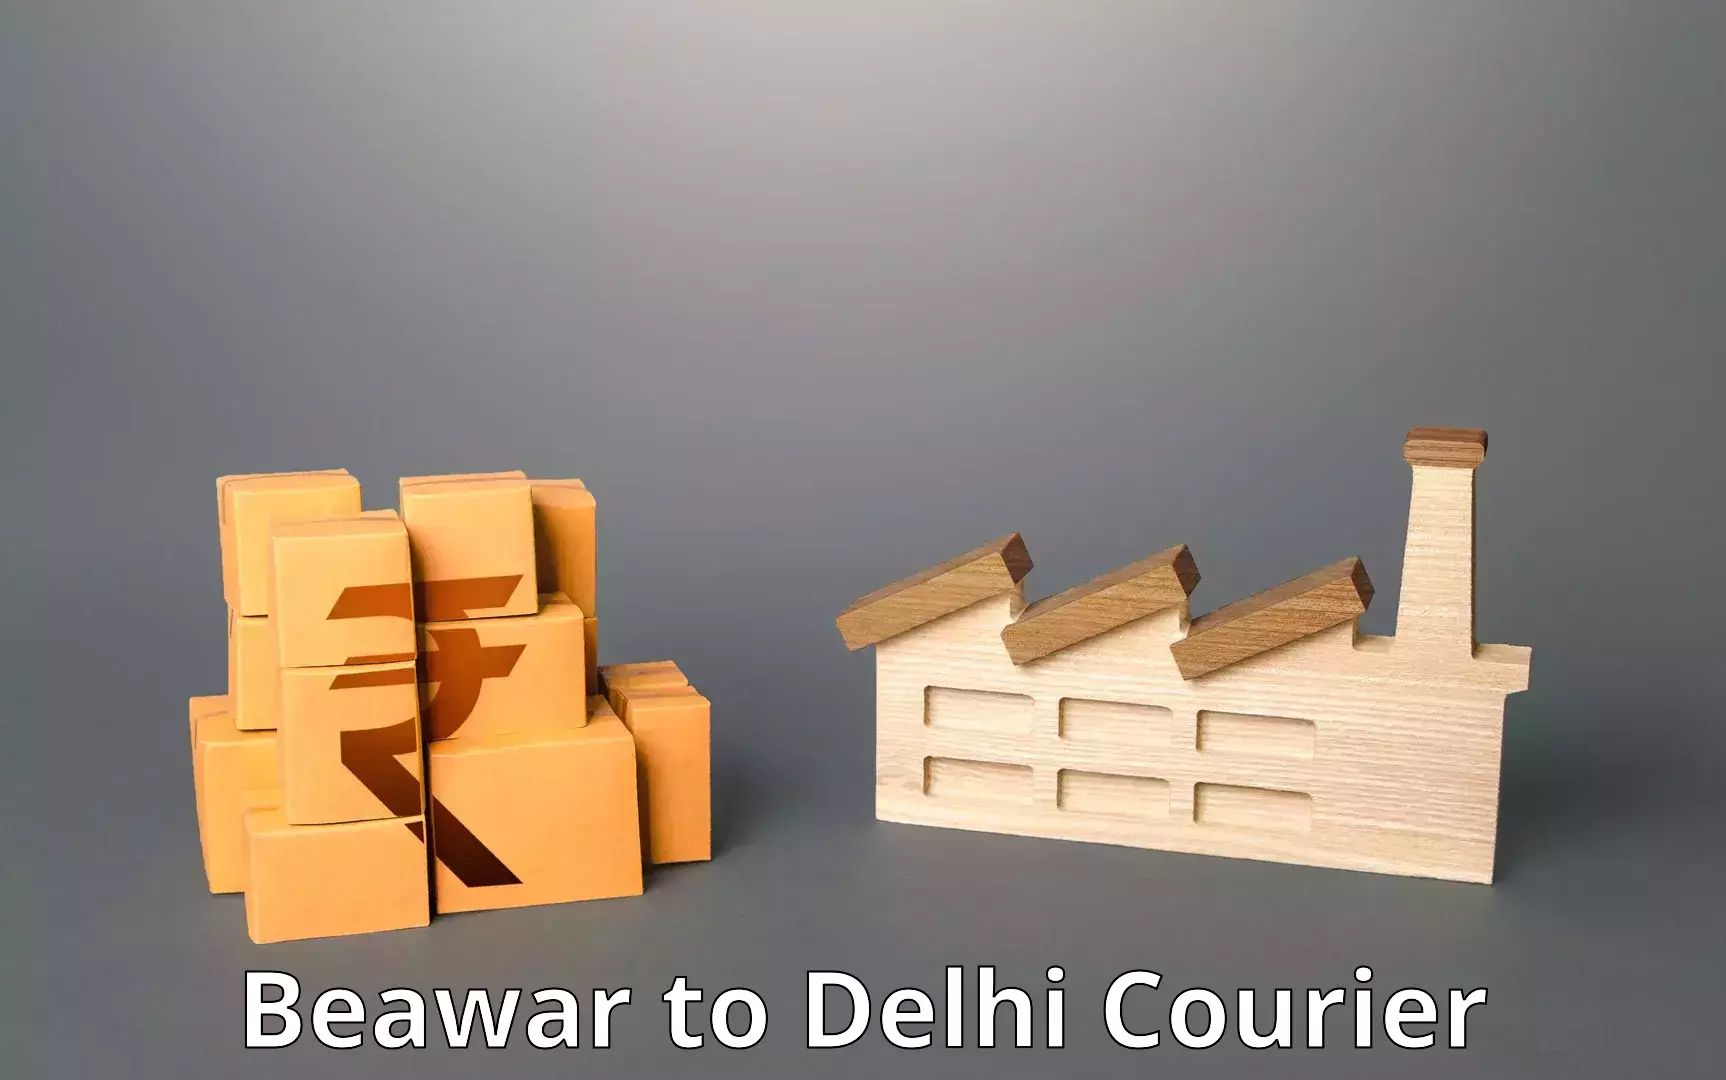 Cargo delivery service Beawar to East Delhi